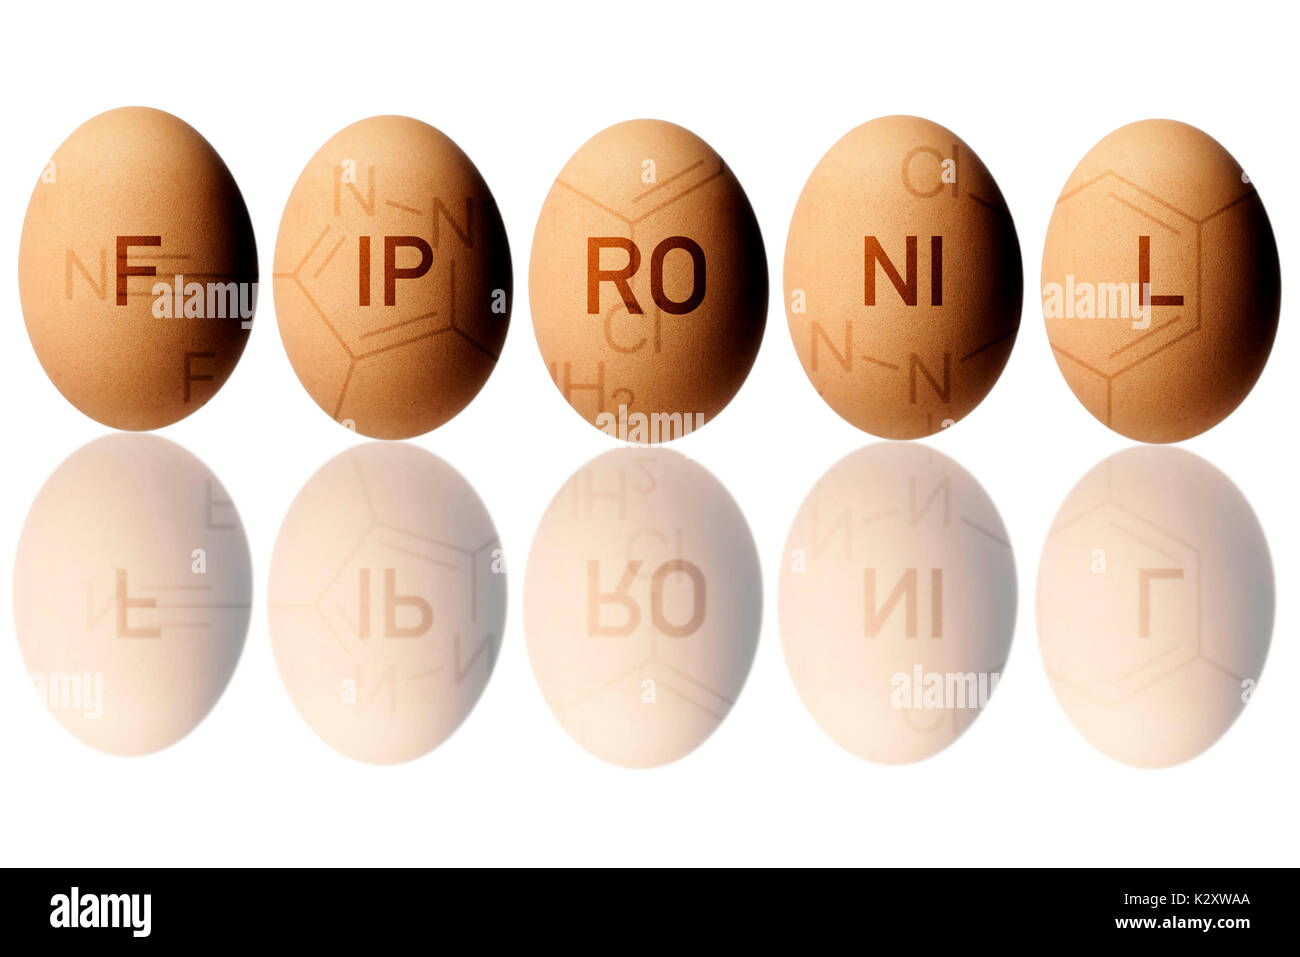 Chicken eggs with stroke Fipronil, symbolic photo for Fipronil load with eggs, Huehnereier mit Schriftzug Fipronil, Symbolfoto fuer Fipronil-Belastung Stock Photo